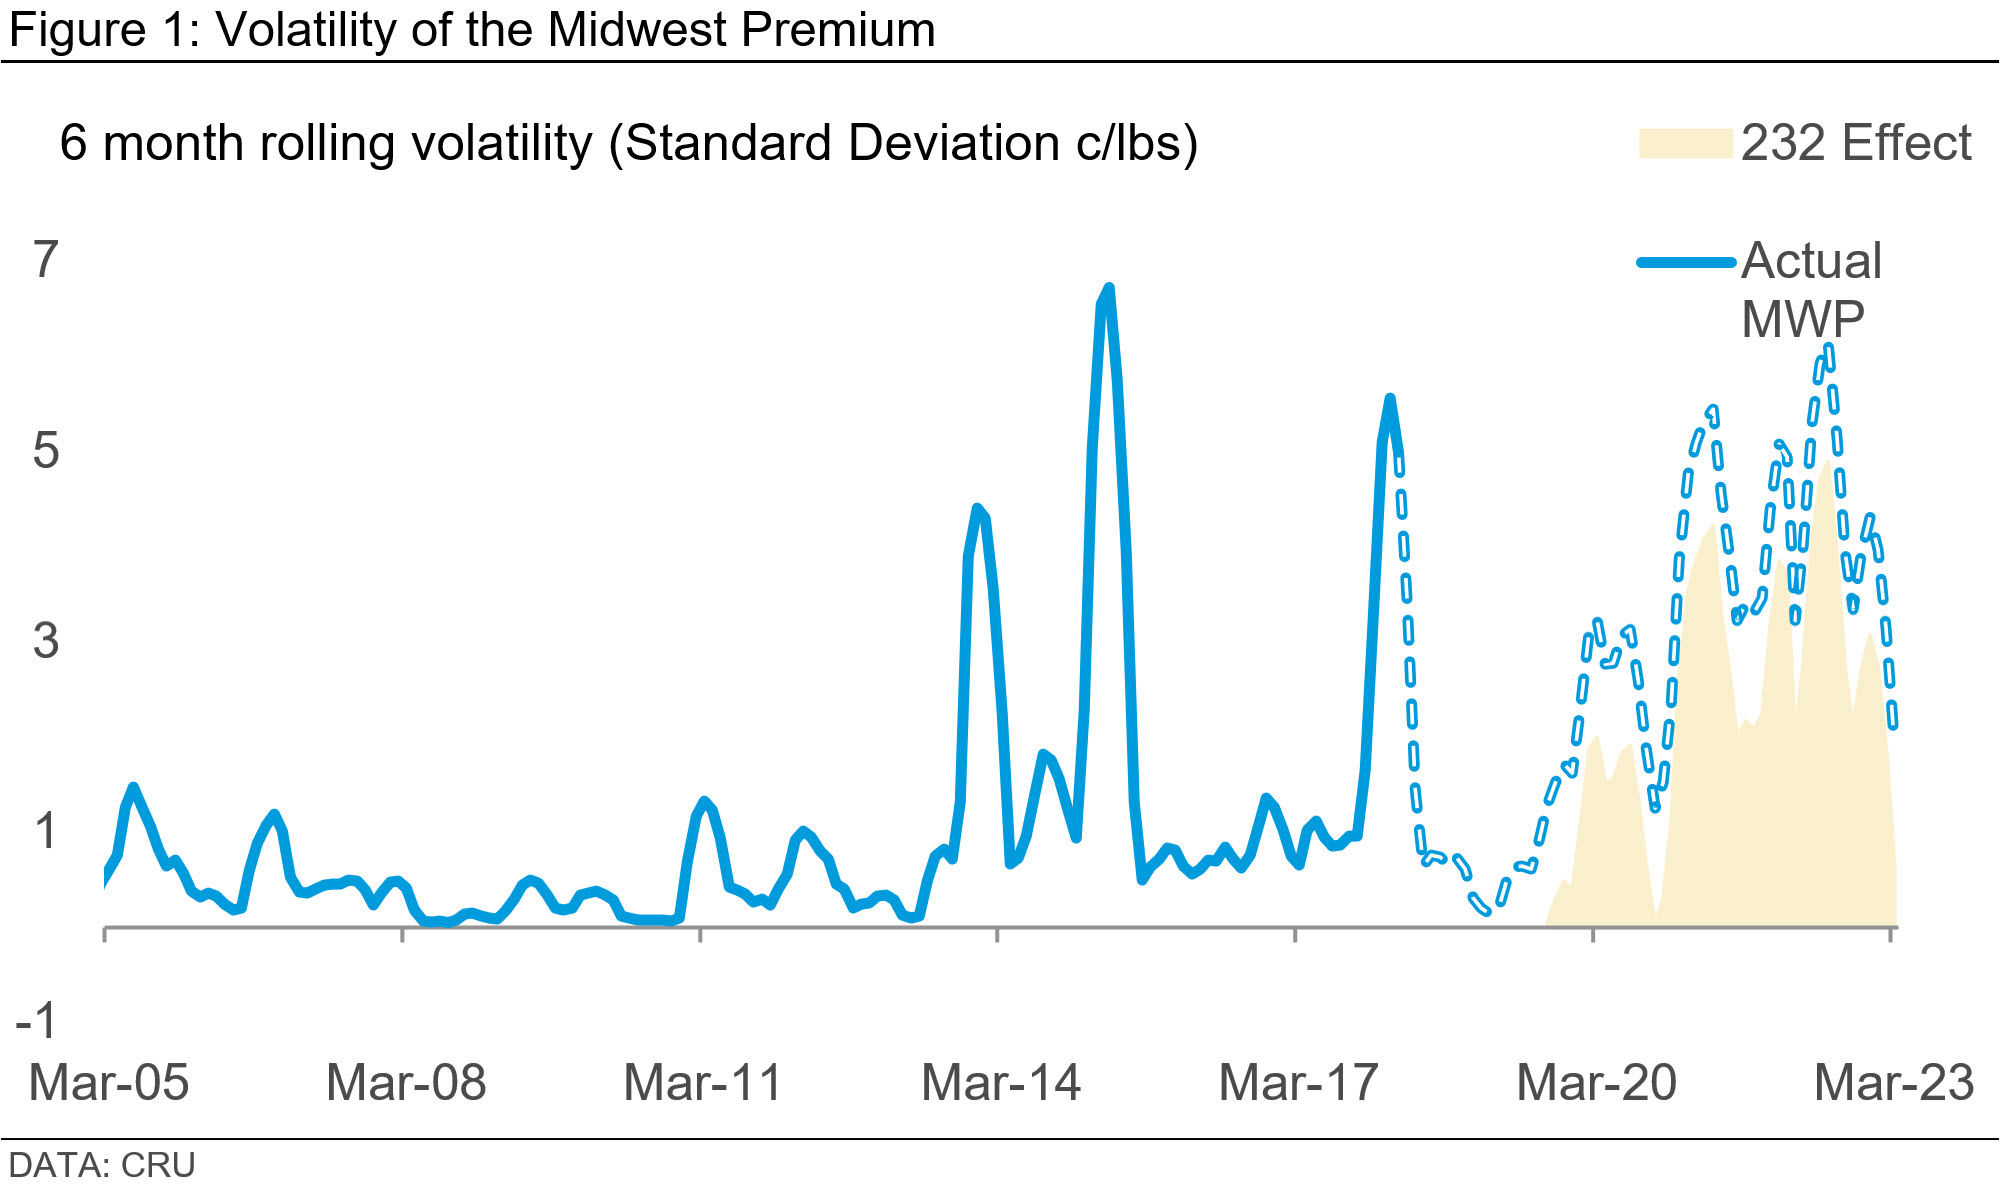 Graph showing volatility of the midwest premium